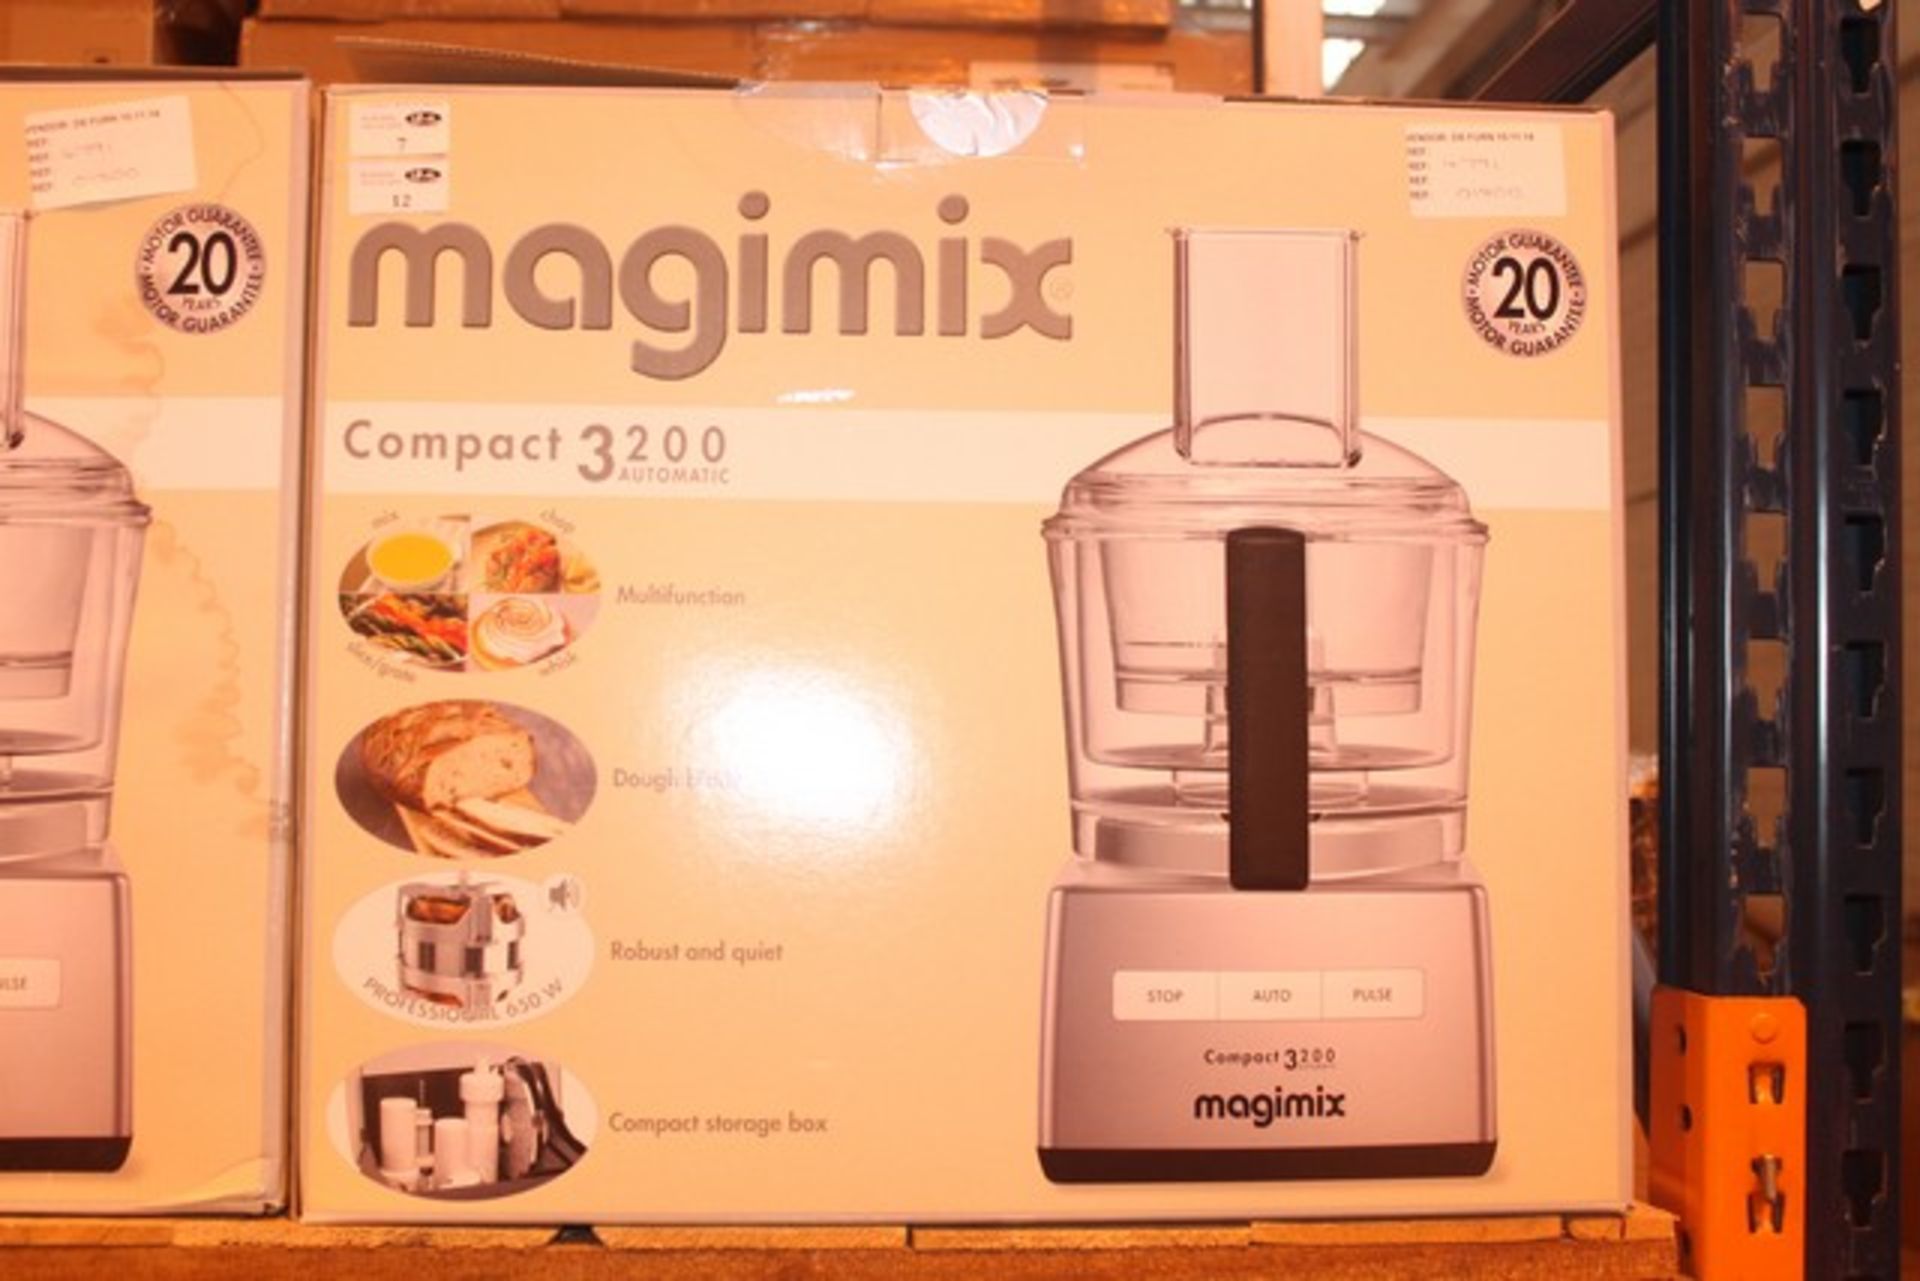 1 x BOXED MAGIMIX COMPACT 3200 AUTOMATIC FOOD PROCESSOR (4791) RRP 180 (10/11/2014)  *PLEASE NOTE